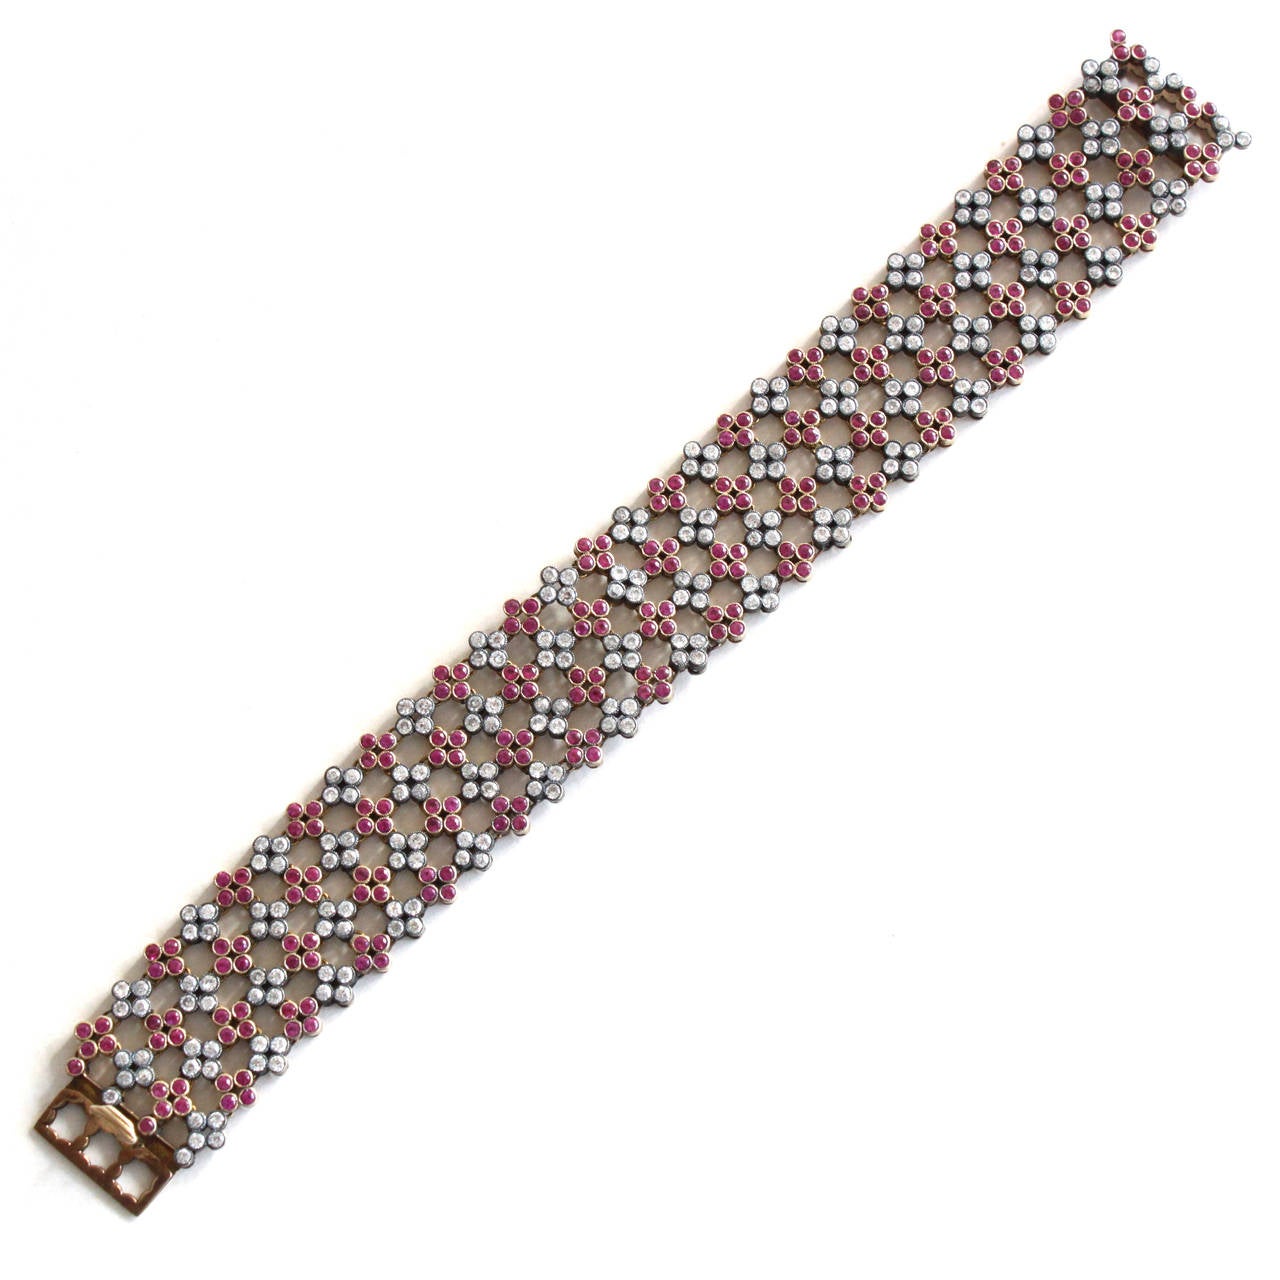 A very chic and unusual cluster bracelet, alternating with fine rubies and diamonds in a unique floral quatrefoils design. 
This bracelet would beautifully complement a lace dress or a wedding gown.

The diamonds and rubies weigh ca. 3.5 carats